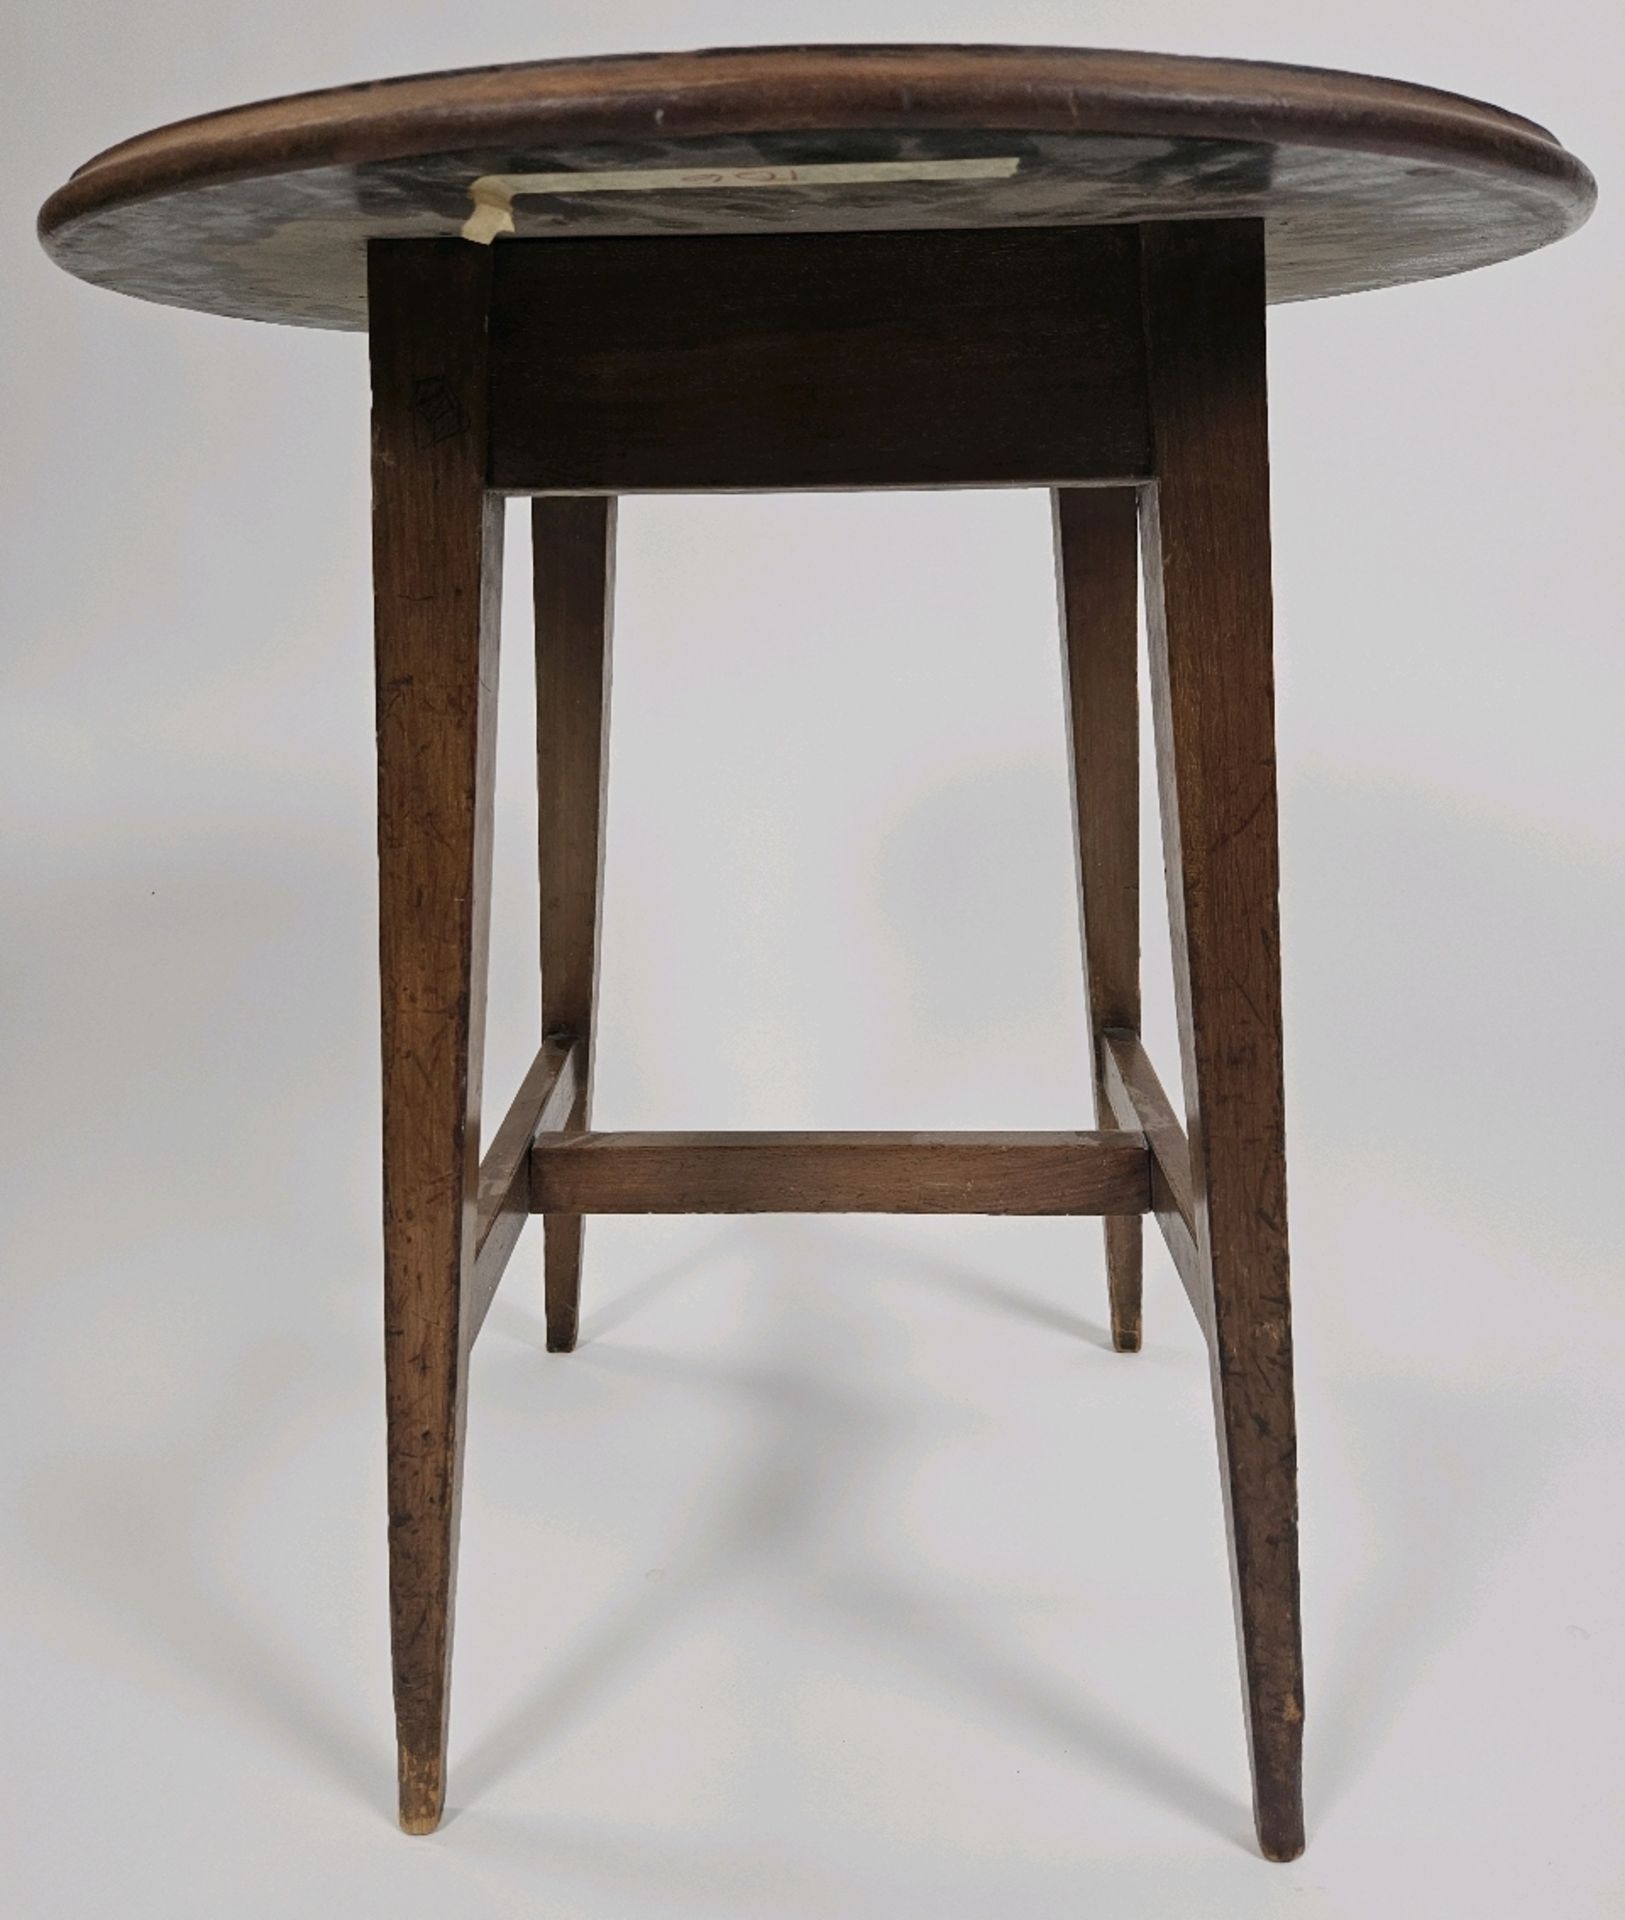 Victorian Style Side Table - Image 3 of 3